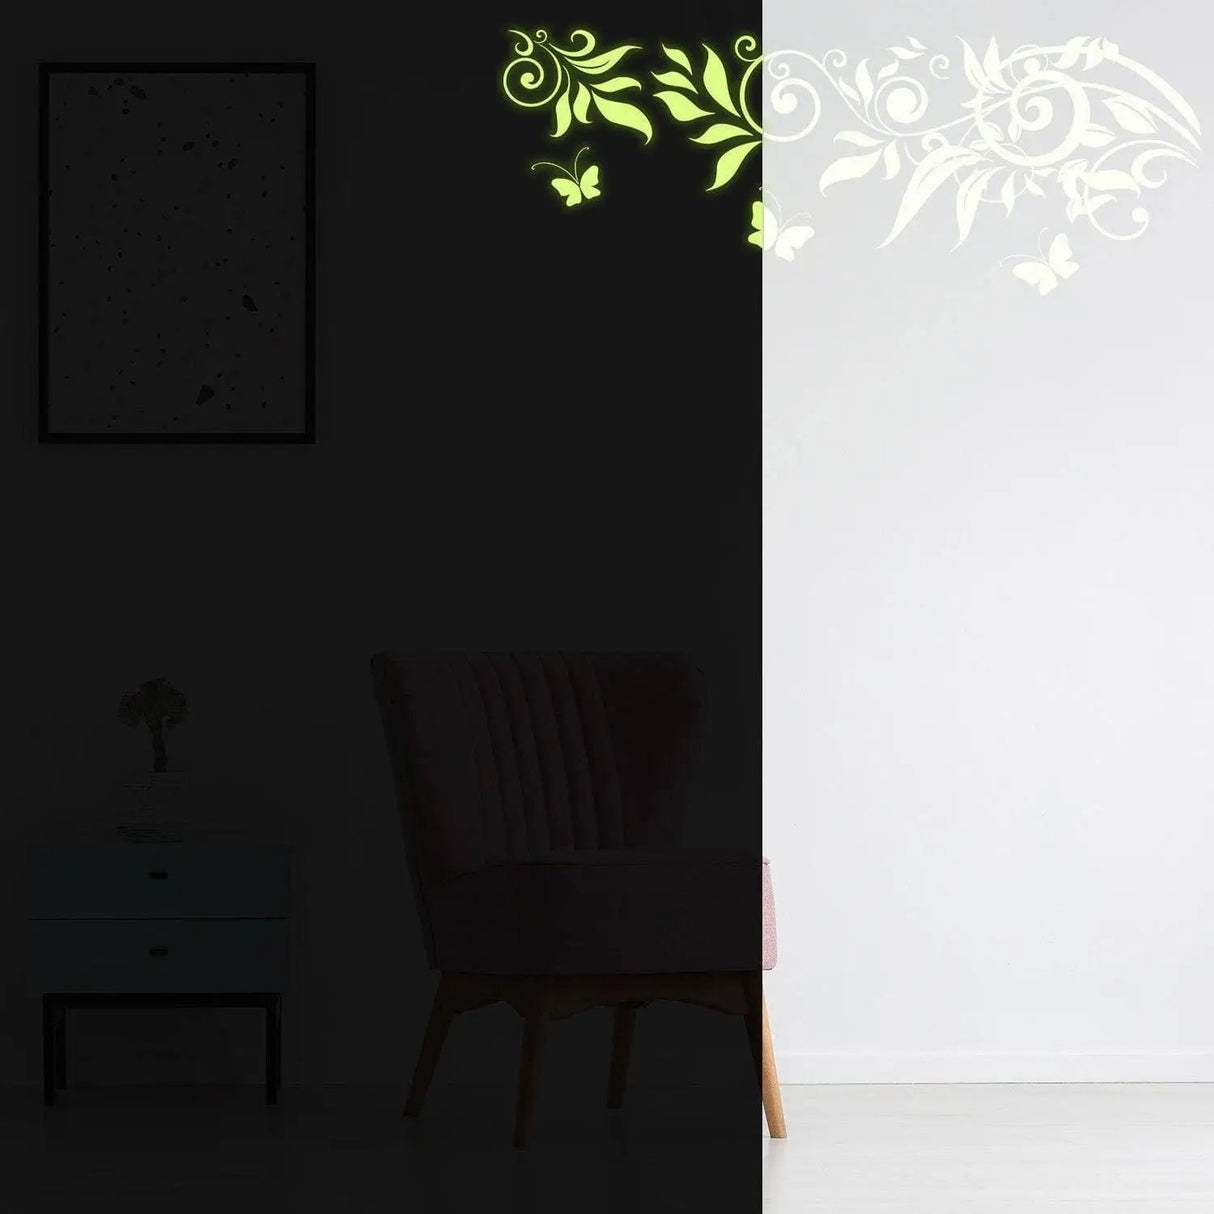 Glow At Night Decal Branch Wall Sticker - Glowing Vinyl In Dark Flower The Branches - Nature Spring Butterflies Flowery - Design Mural Art - Decords